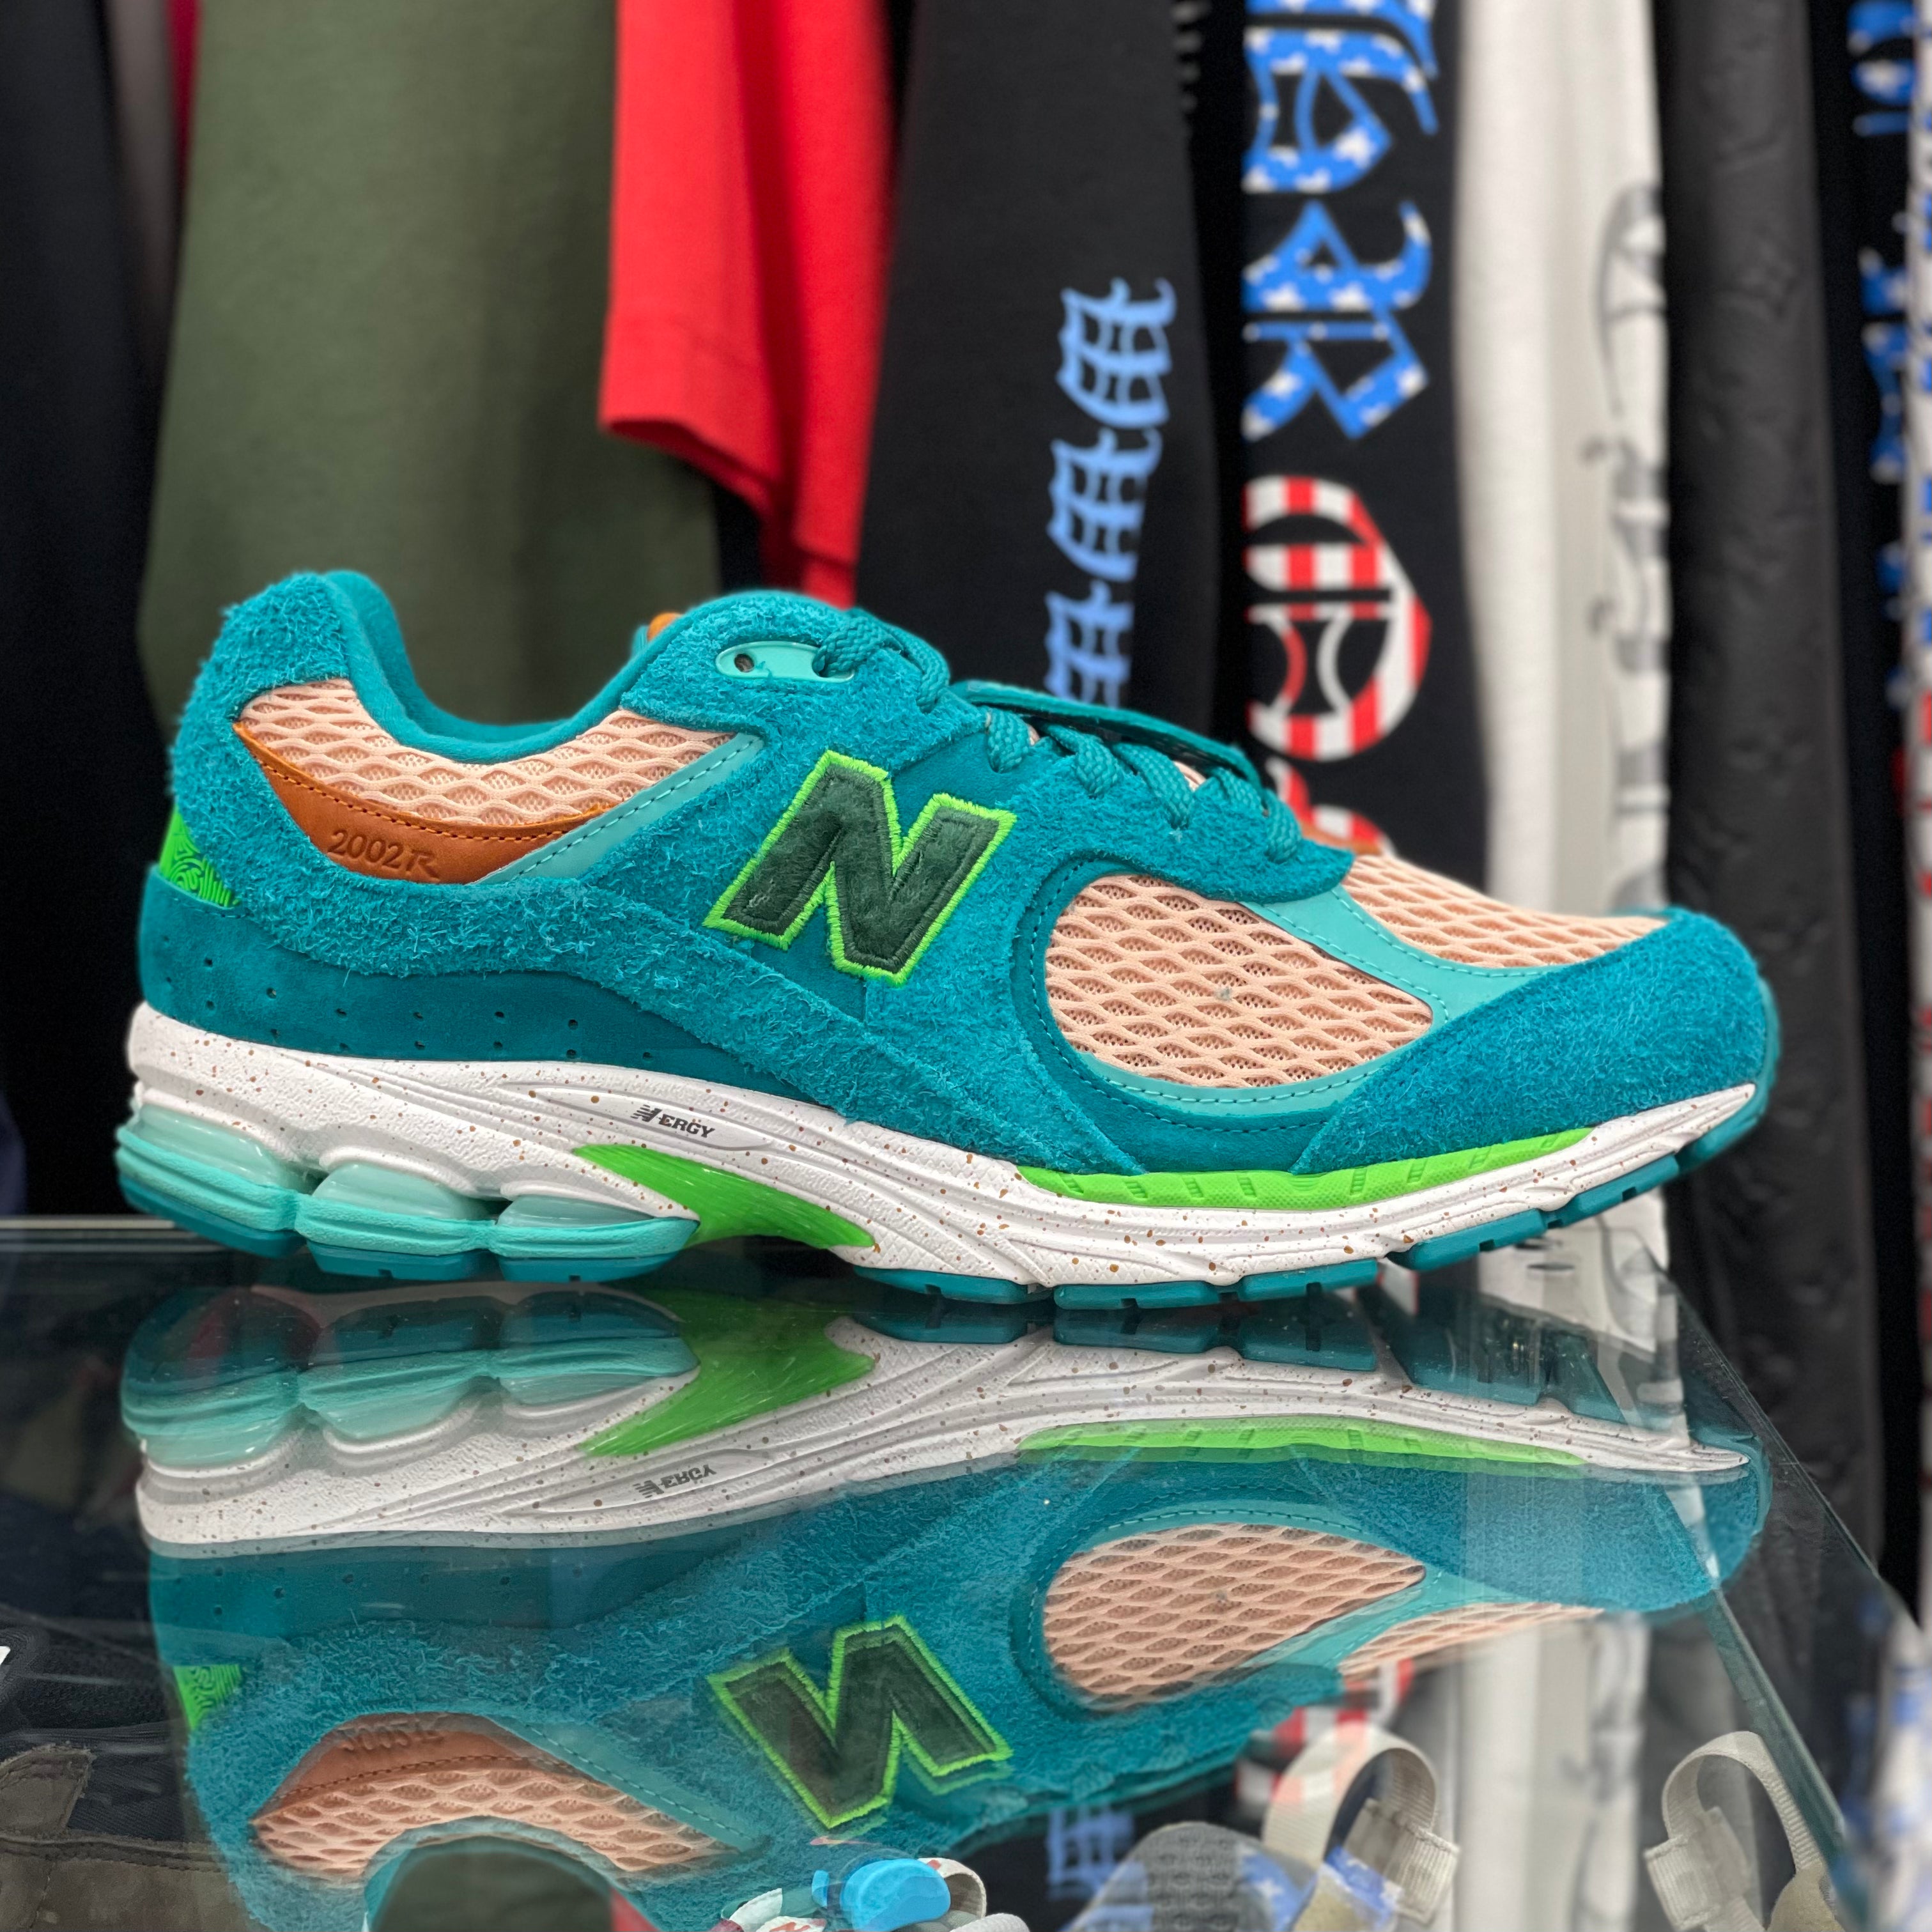 New Balance 2002R “Salehe Bembury Water Be The Guide” | Request